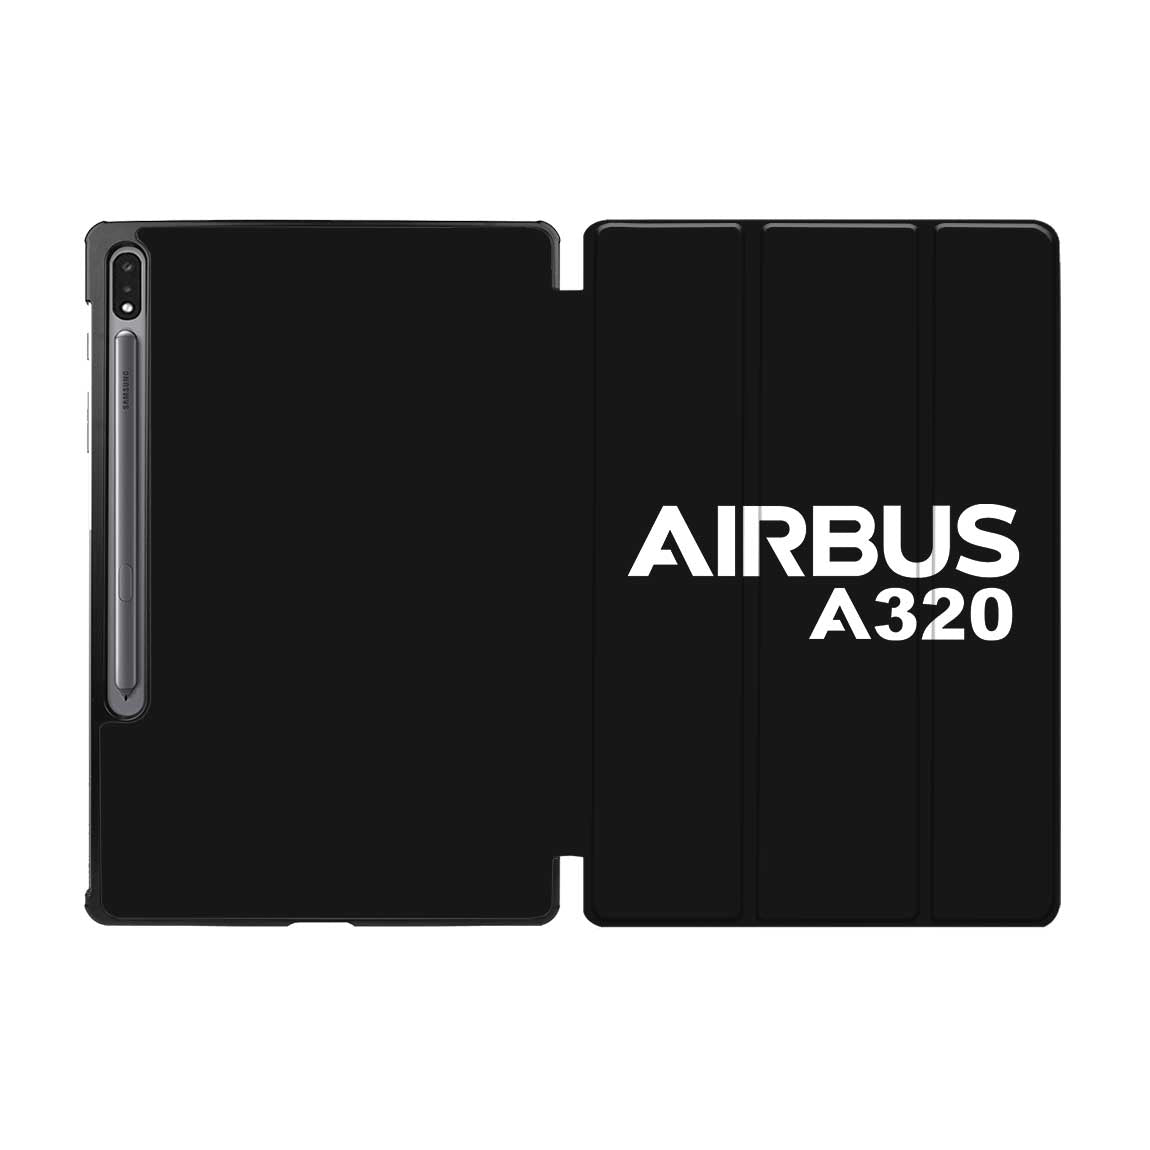 Airbus A320 & Text Designed Samsung Tablet Cases